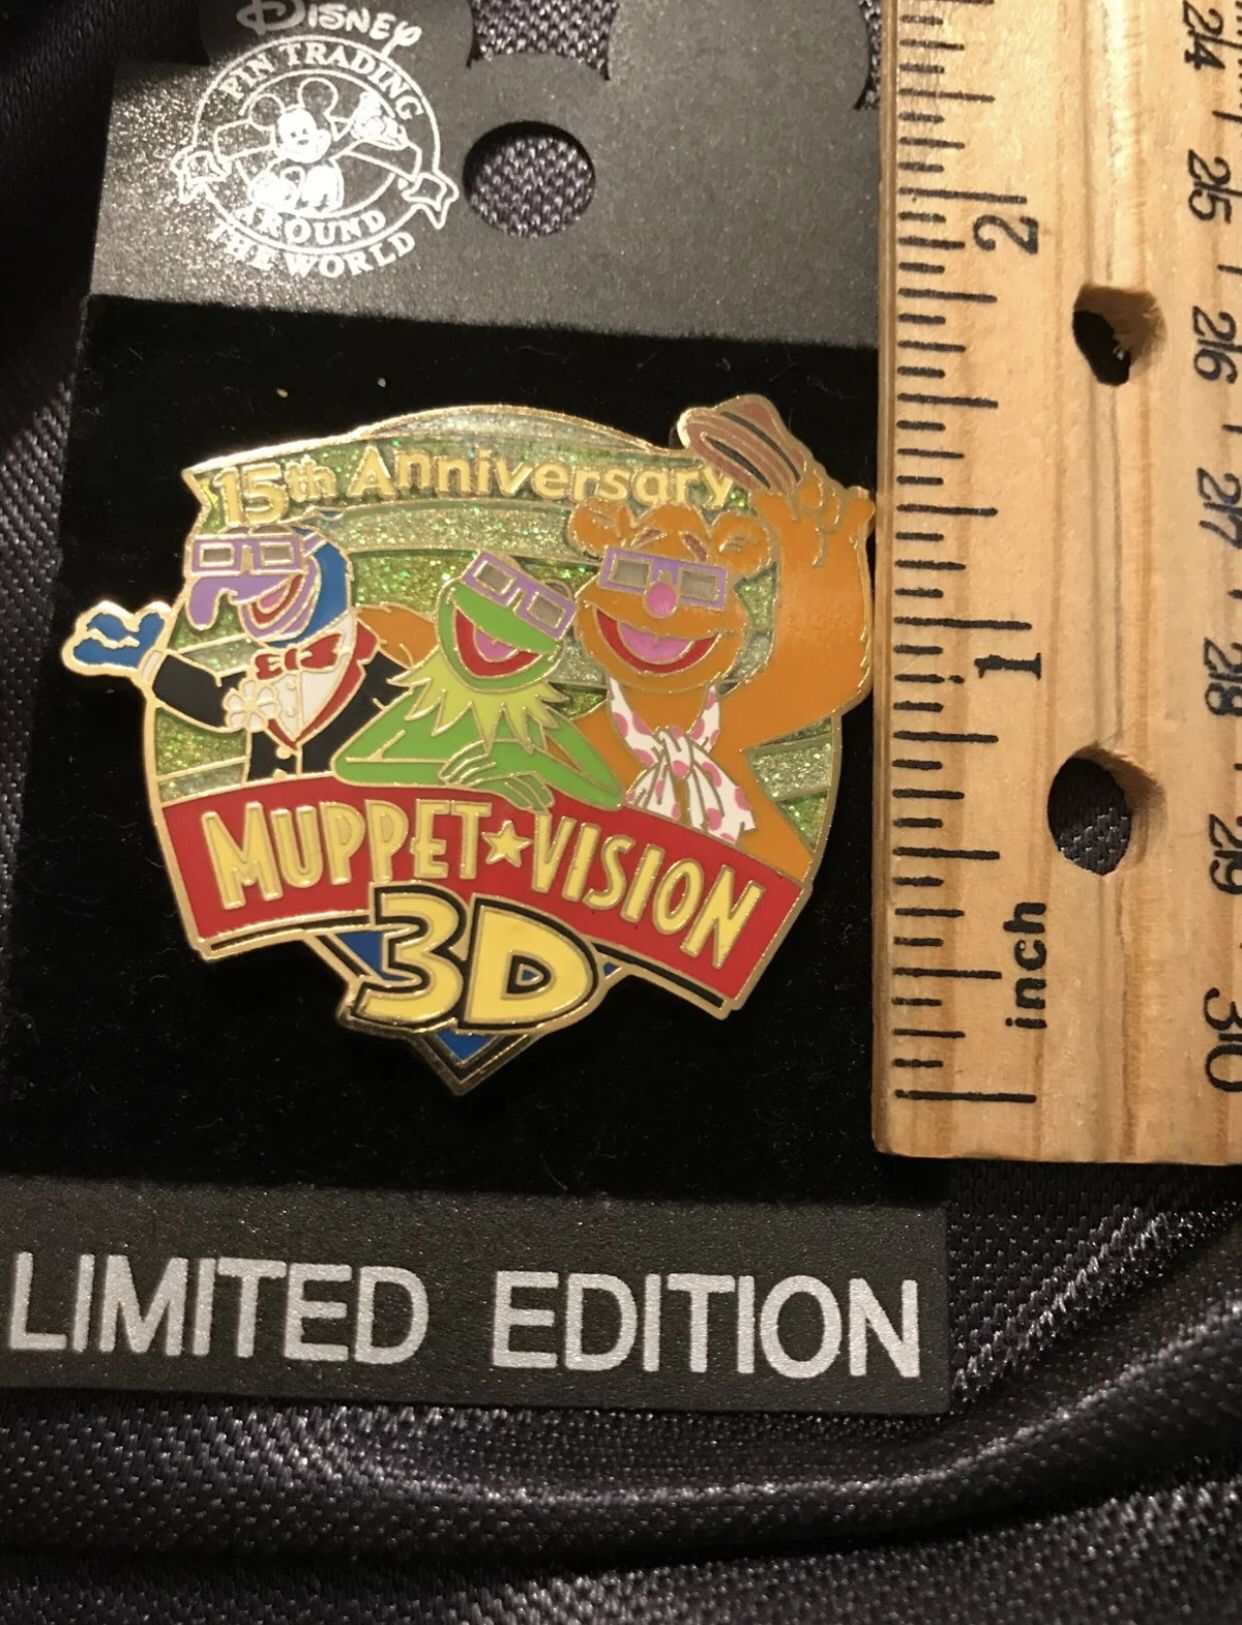 Disney Muppet Vision 3D 15th Year 06 LE